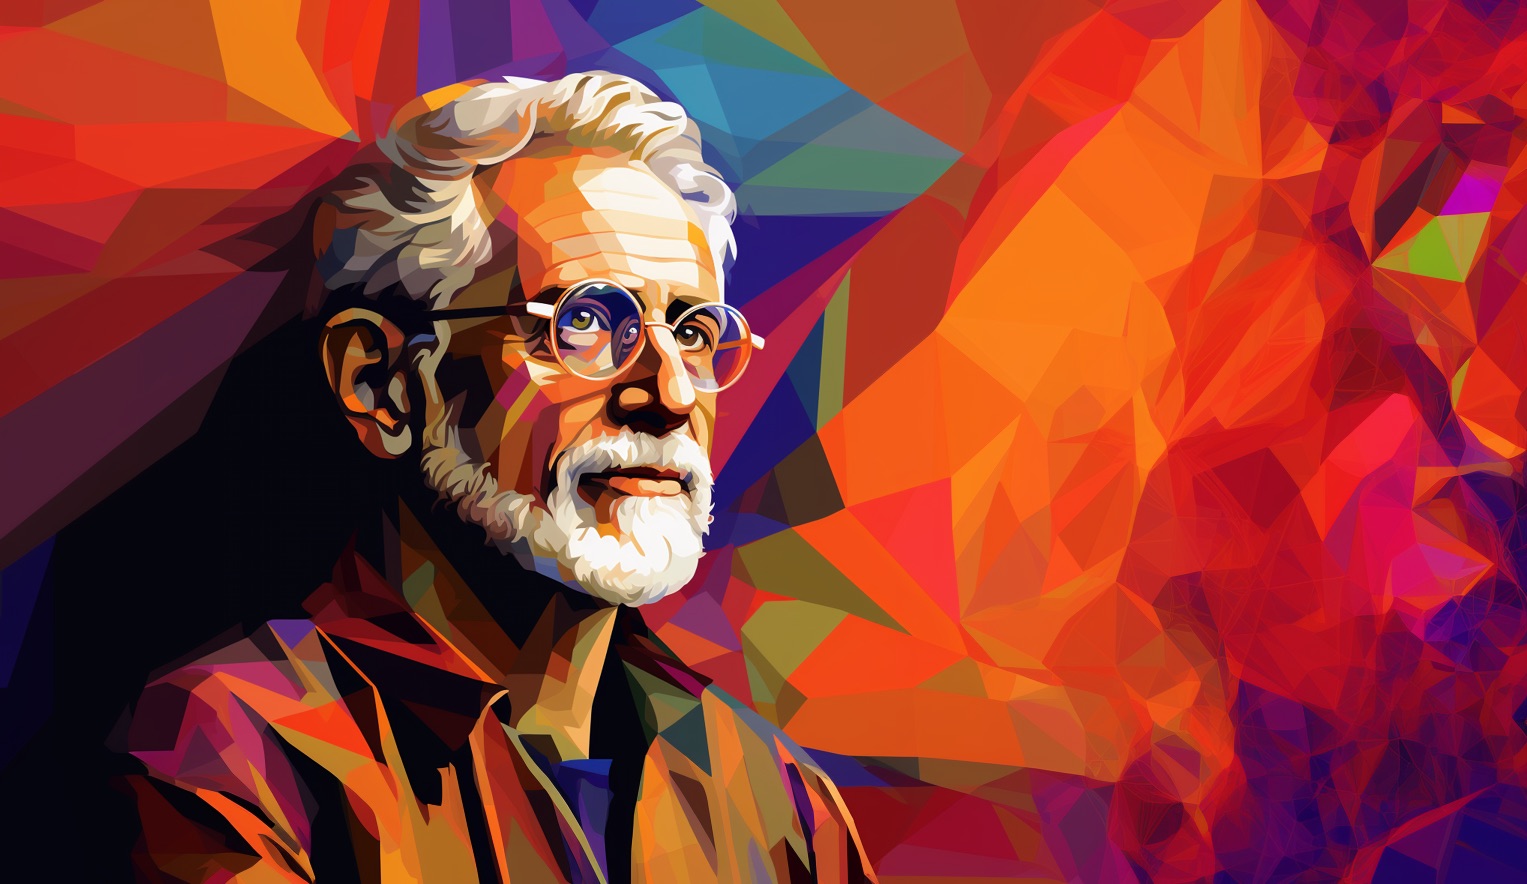 Steve Blank as illustrated by MidJourney